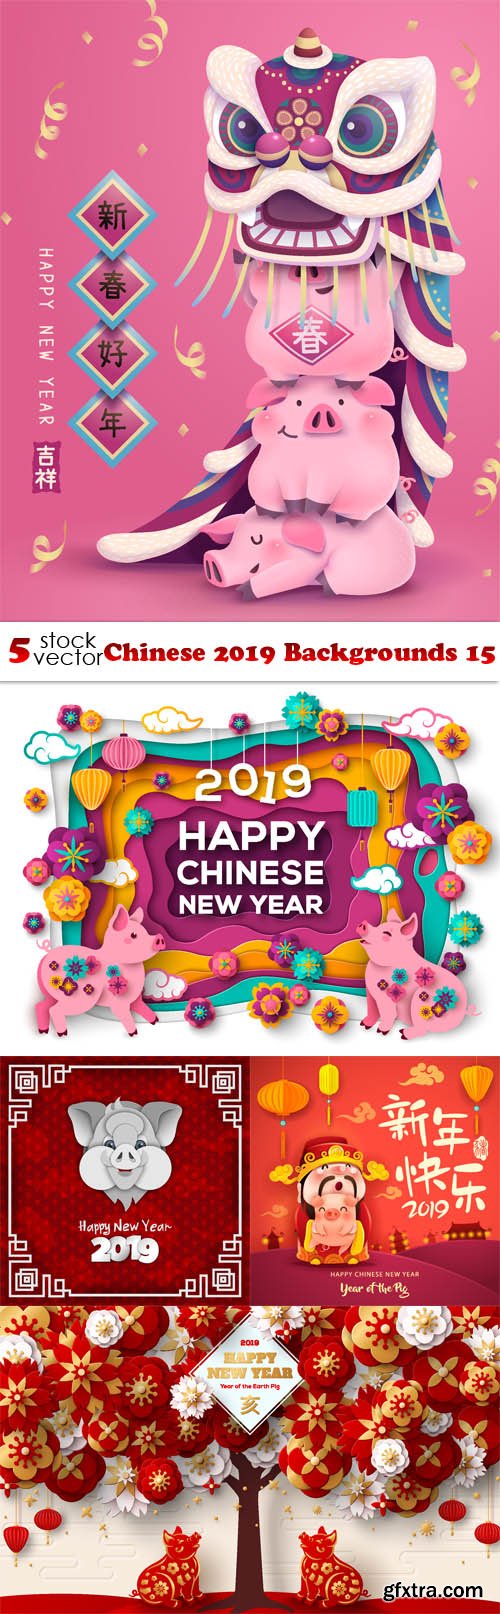 Vectors - Chinese 2019 Backgrounds 15